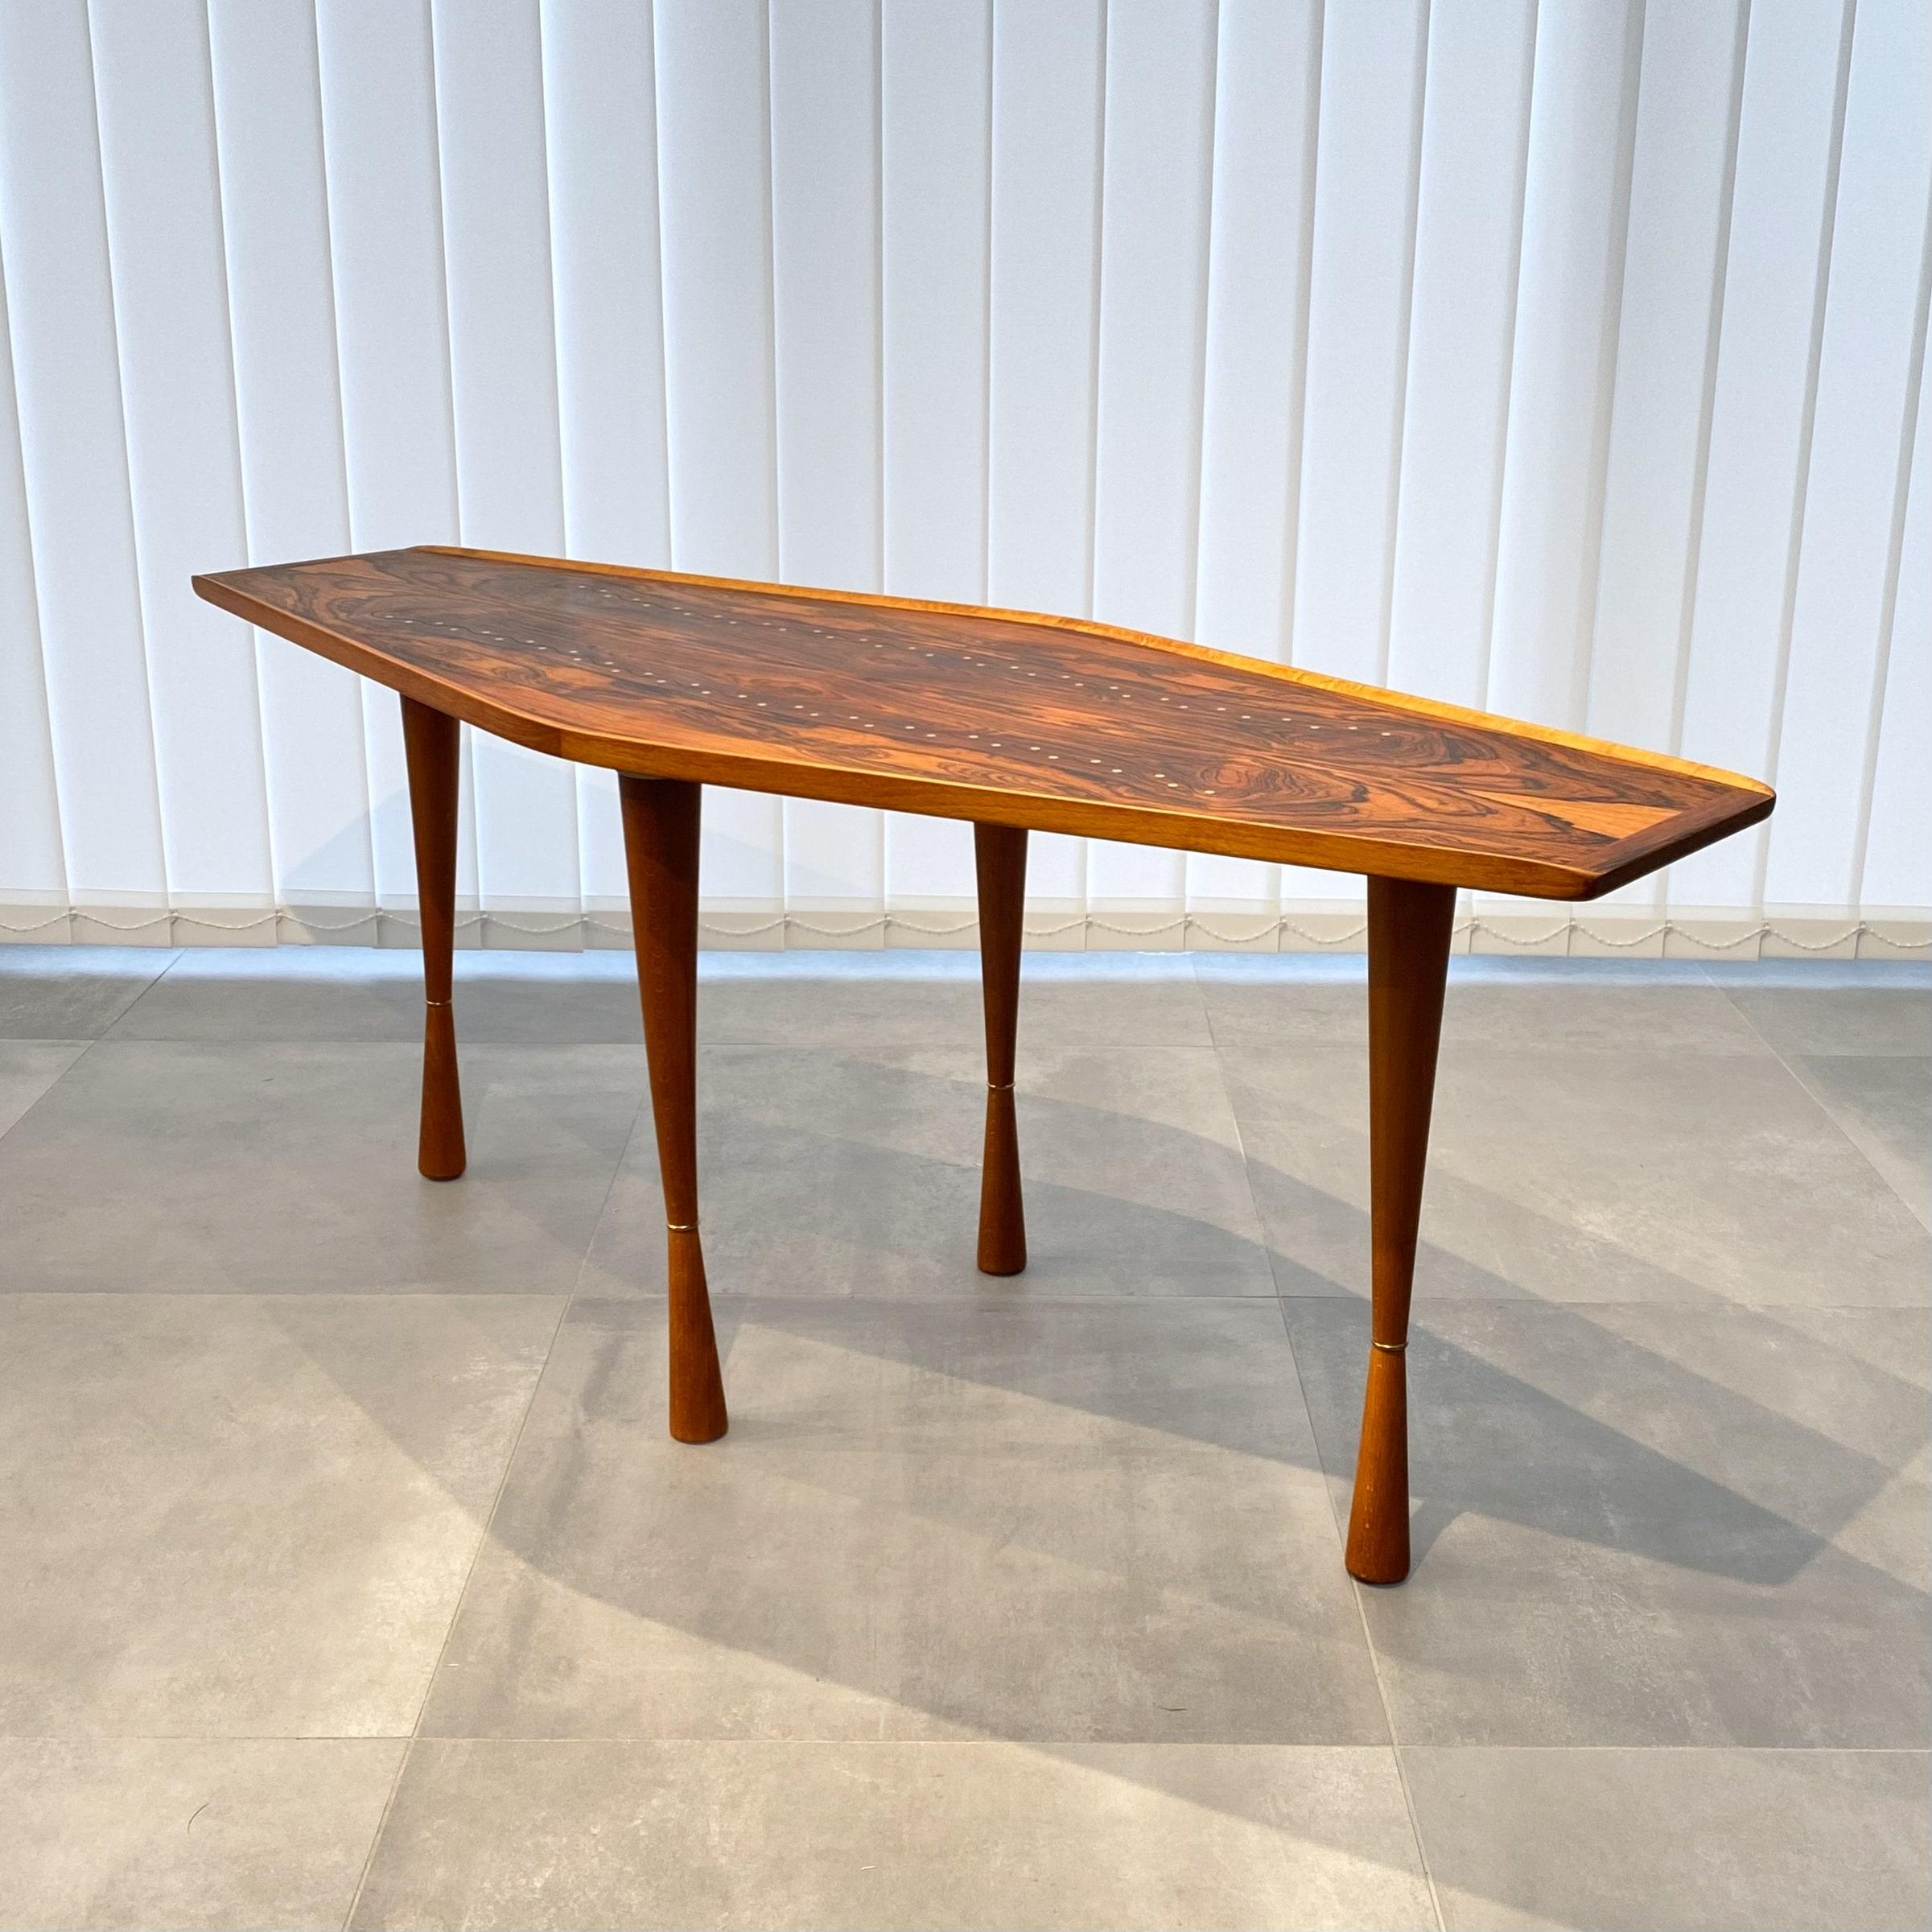 Swedish 1940s modernist coffee table constructed from a hexagonal tabletop with upturned edges resting on four hourglass-shaped legs with brass ring decorations. The tabletop is adorned with brass inlays, reinforcing the dramatic appearance of the